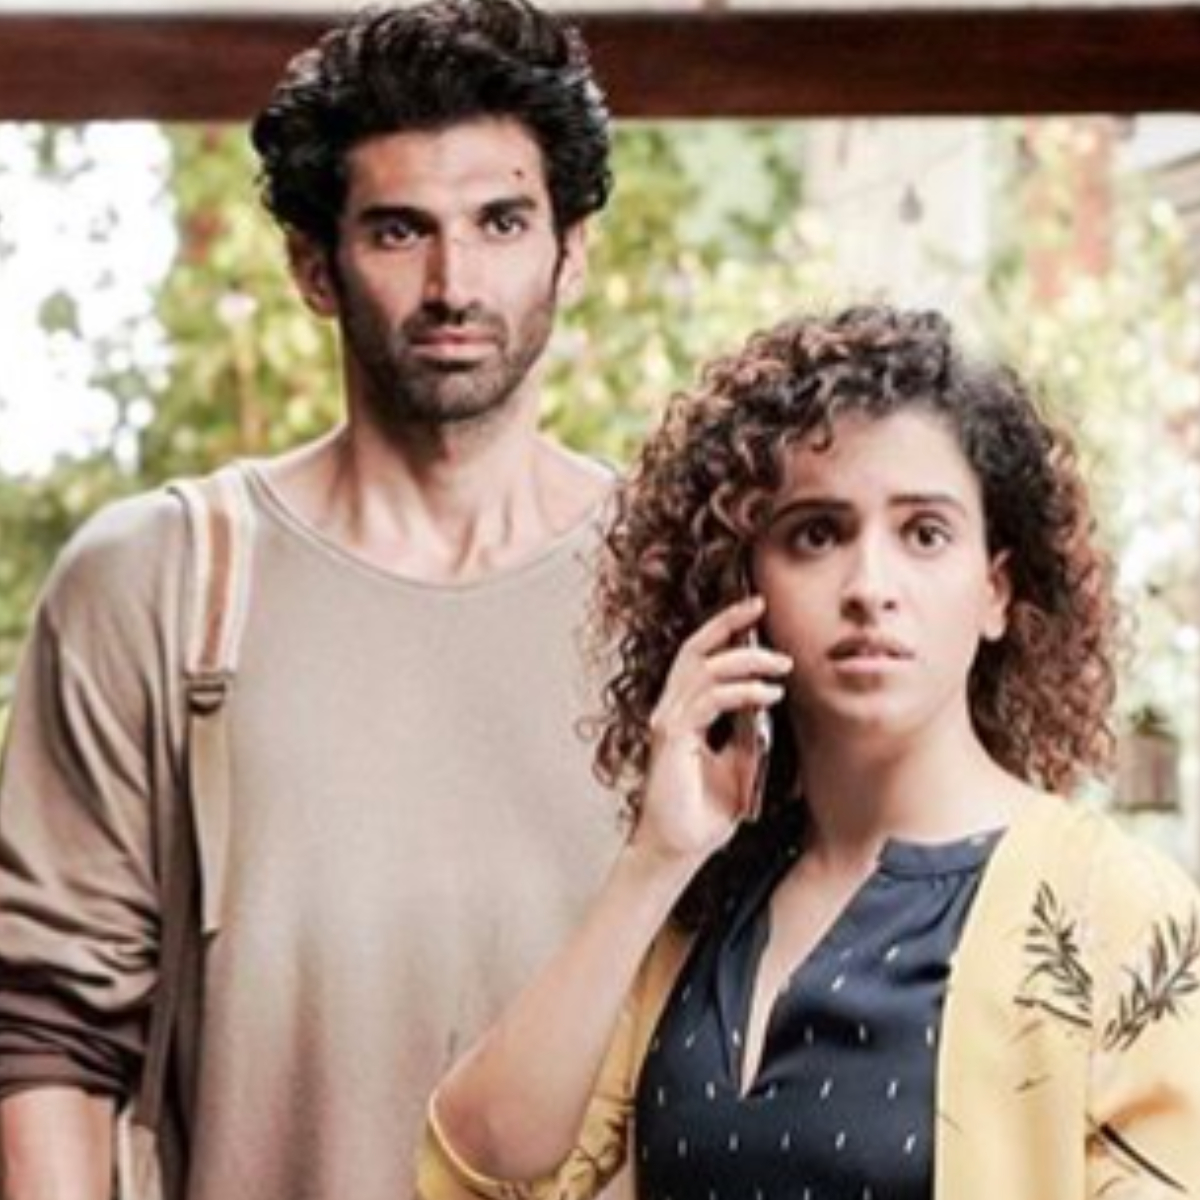 EXCLUSIVE: Sanya Malhotra on chemistry with Aditya Roy Kapur in Ludo: I would love to work with him again